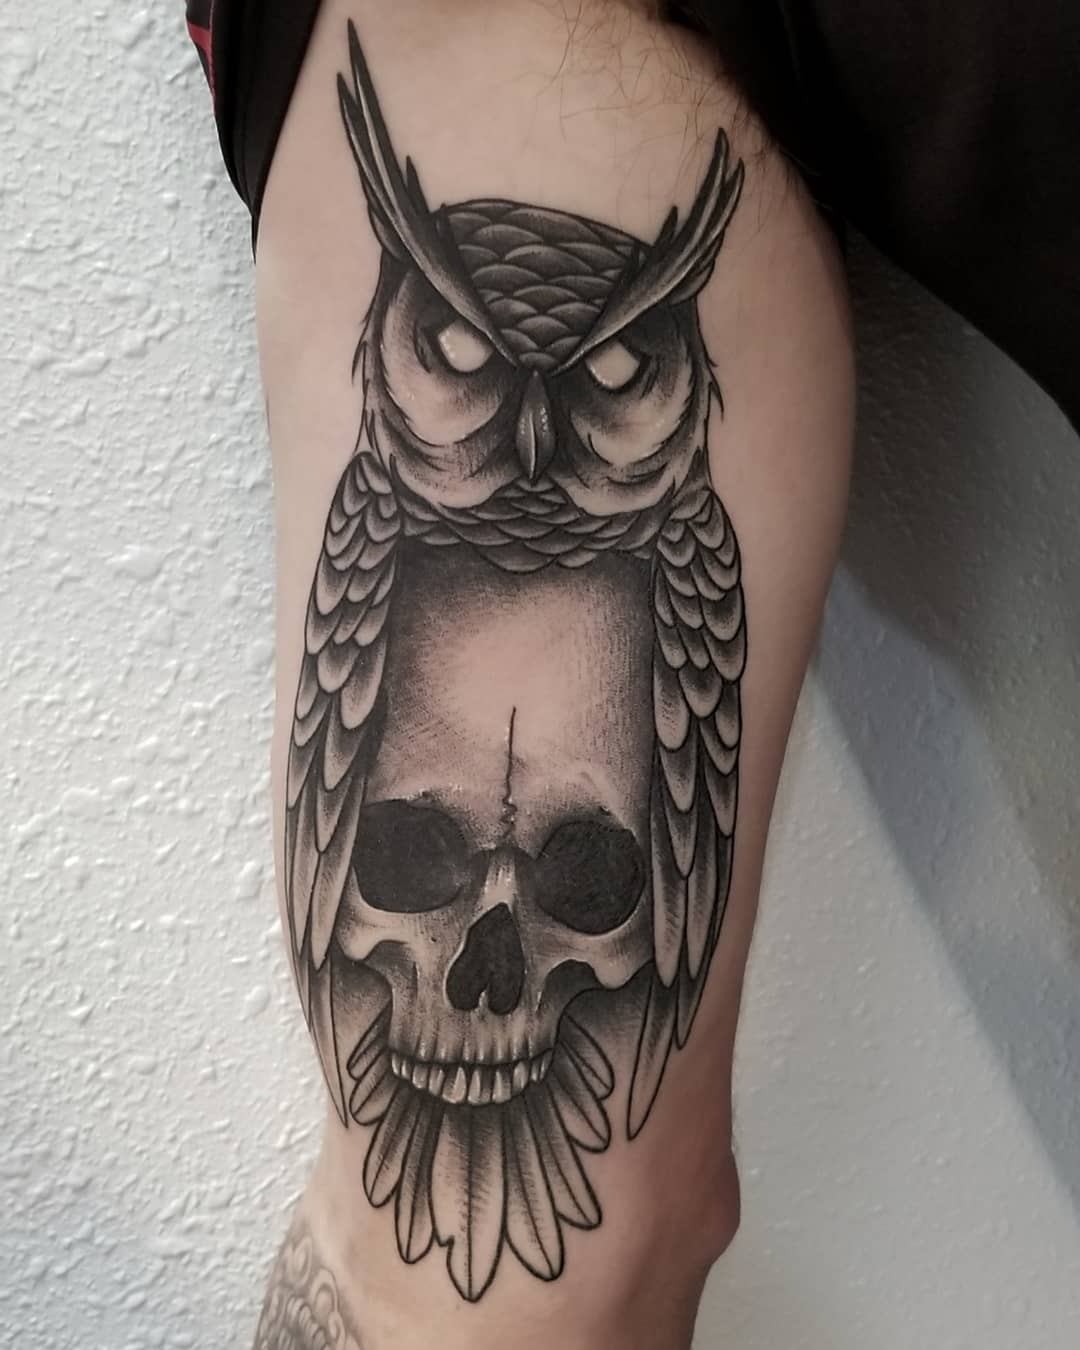 Traditional Black And Gray Owl Tattoo On Arm.